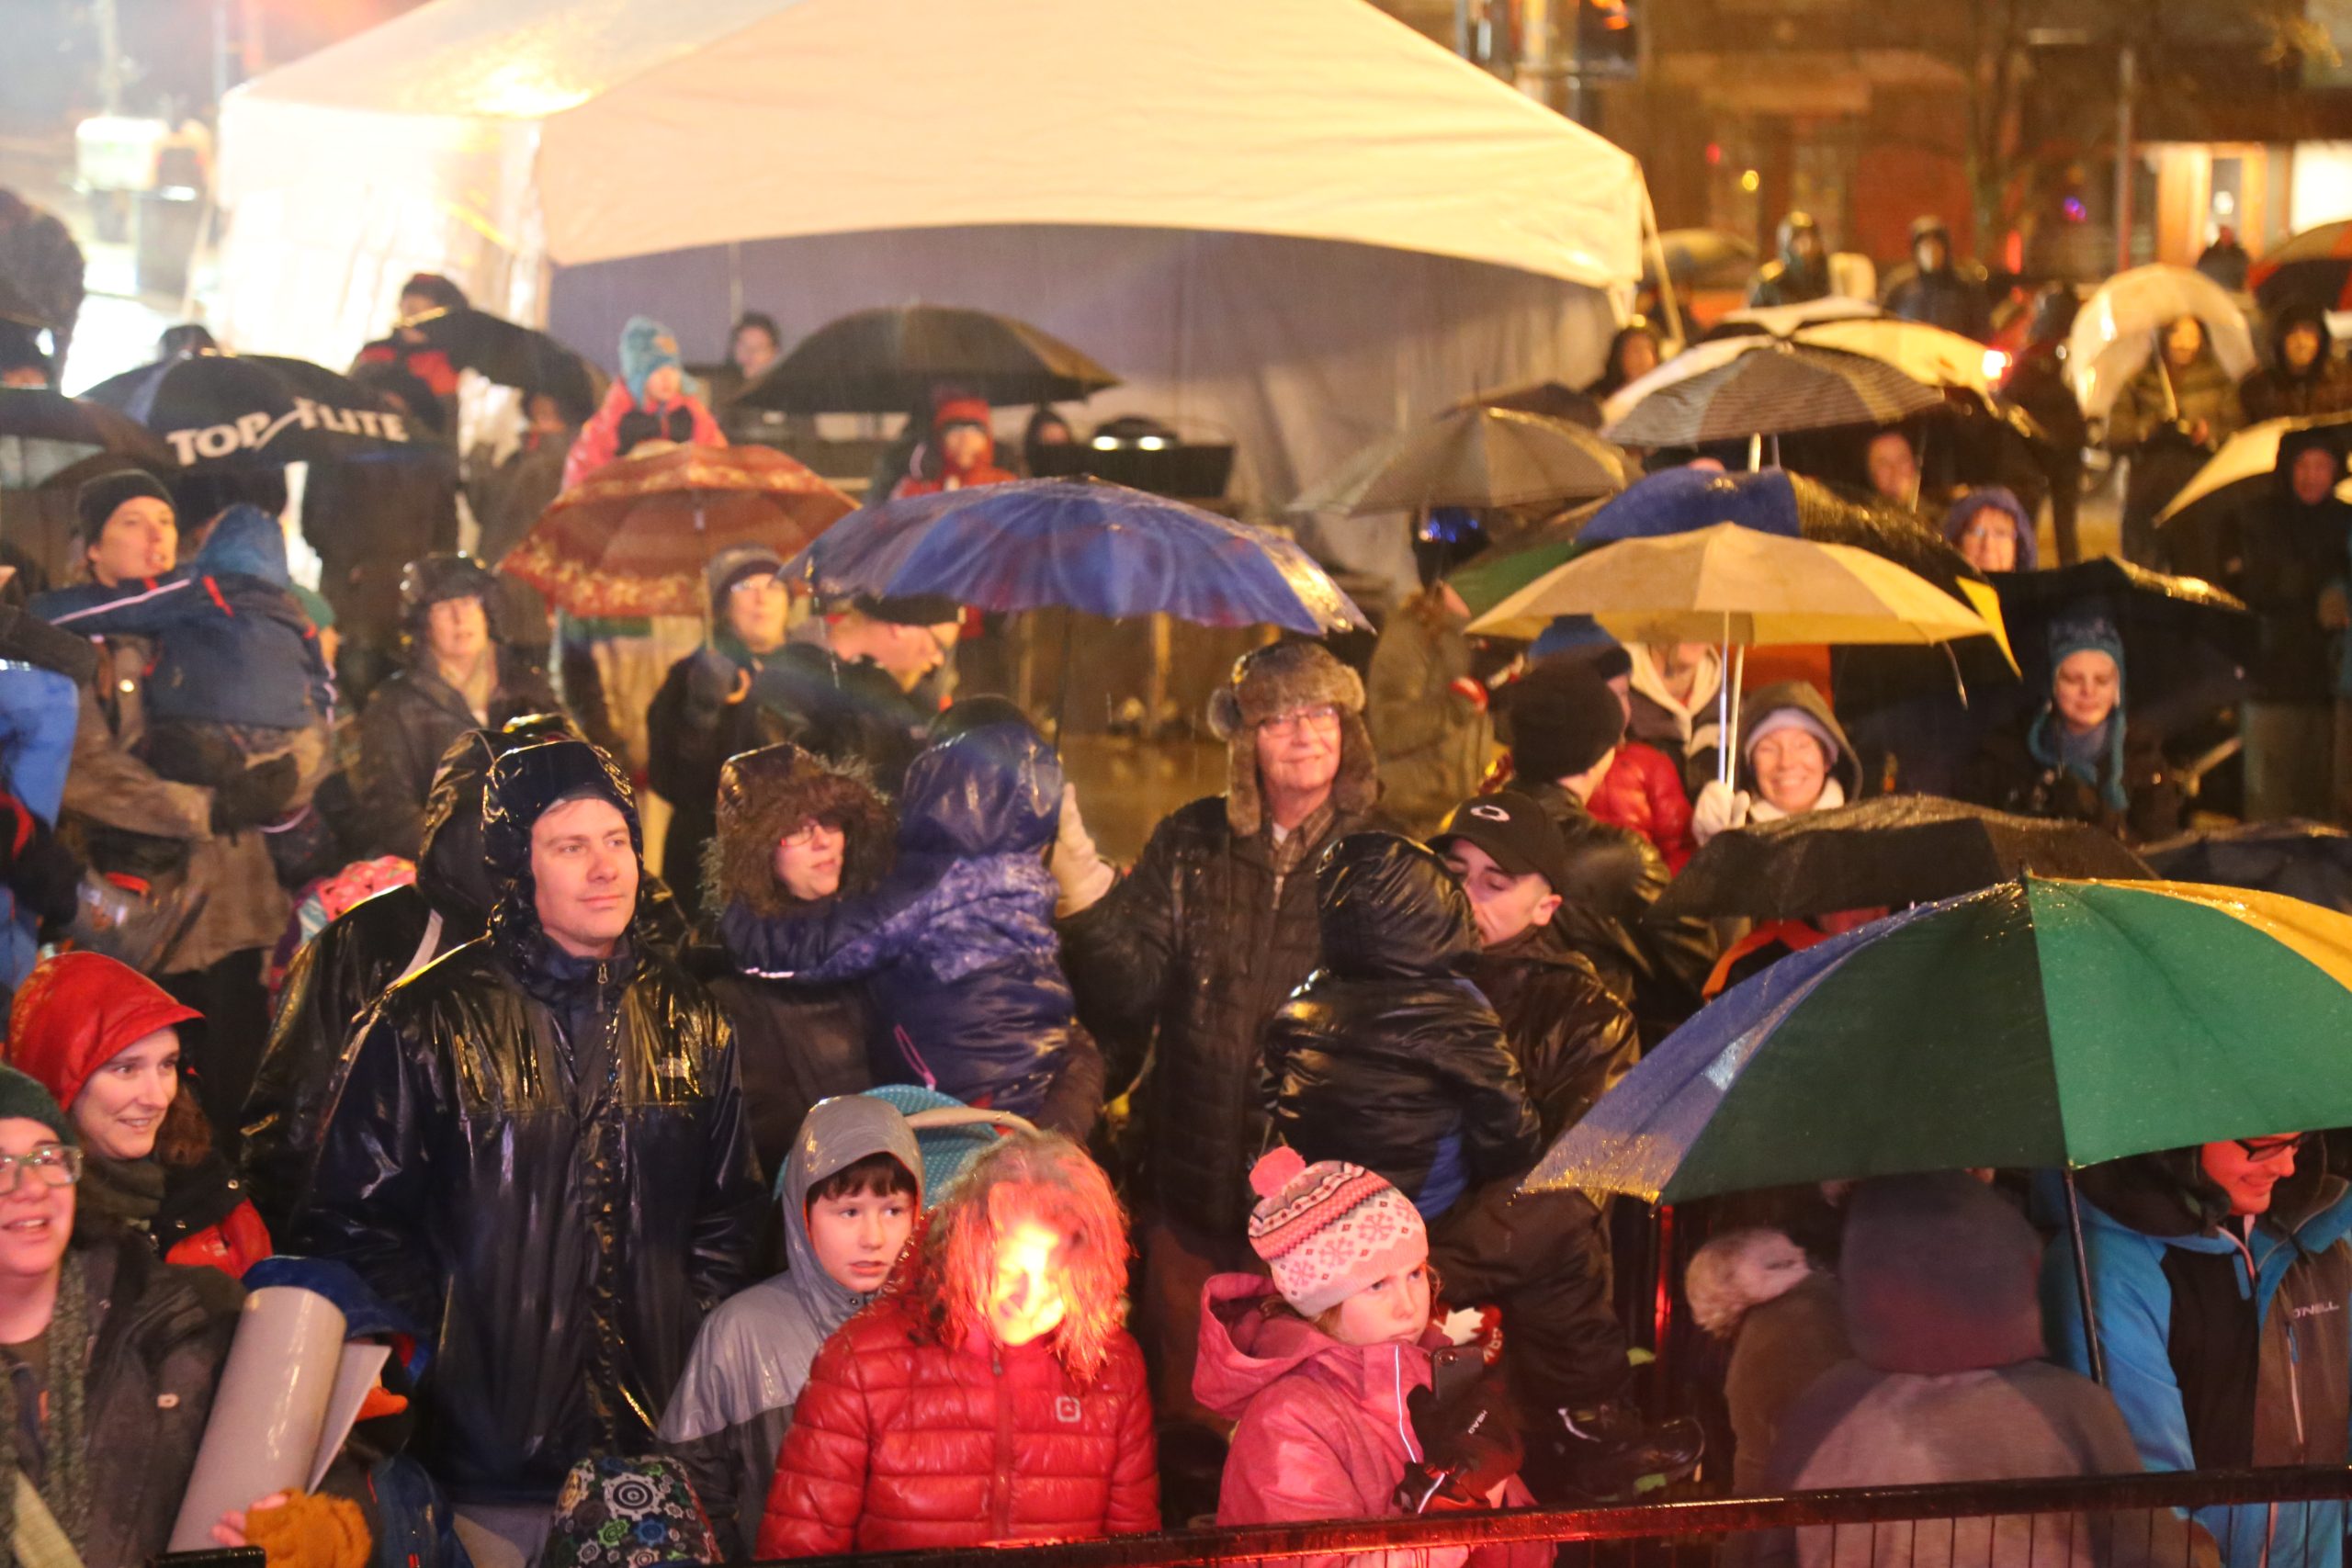 Rain didn't dampen the spirits of Fred Penner fans in Downtown Barrie